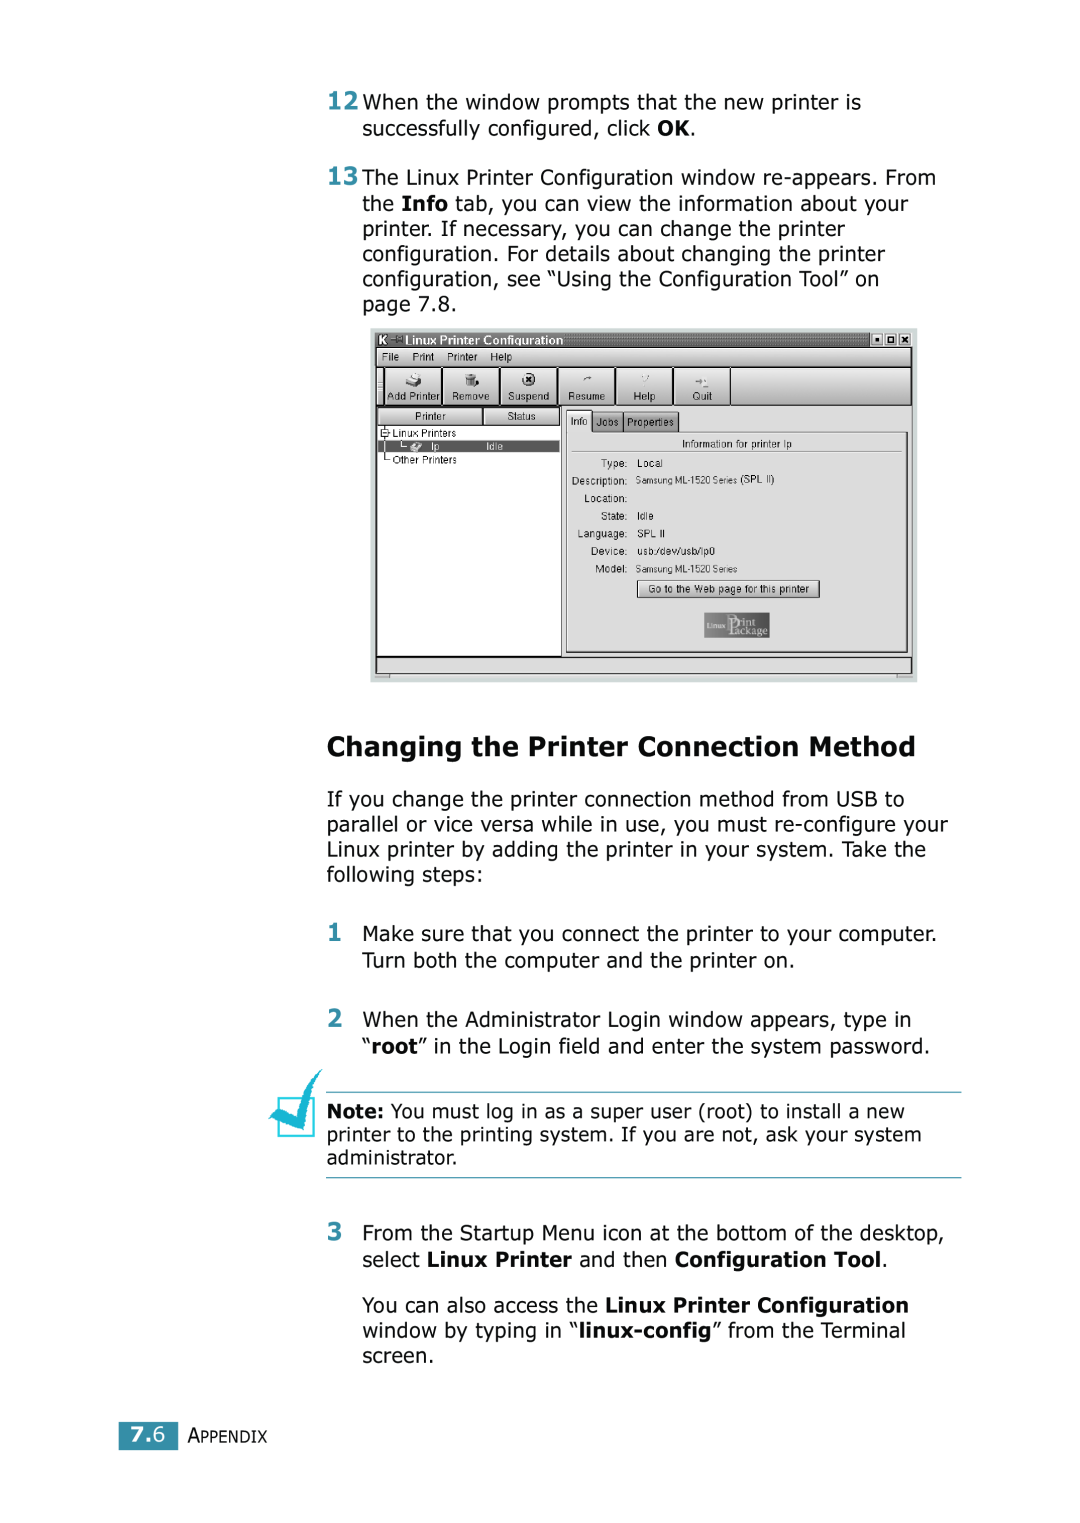 Samsung ML-1520 manual Changing the Printer Connection Method, Appendix 